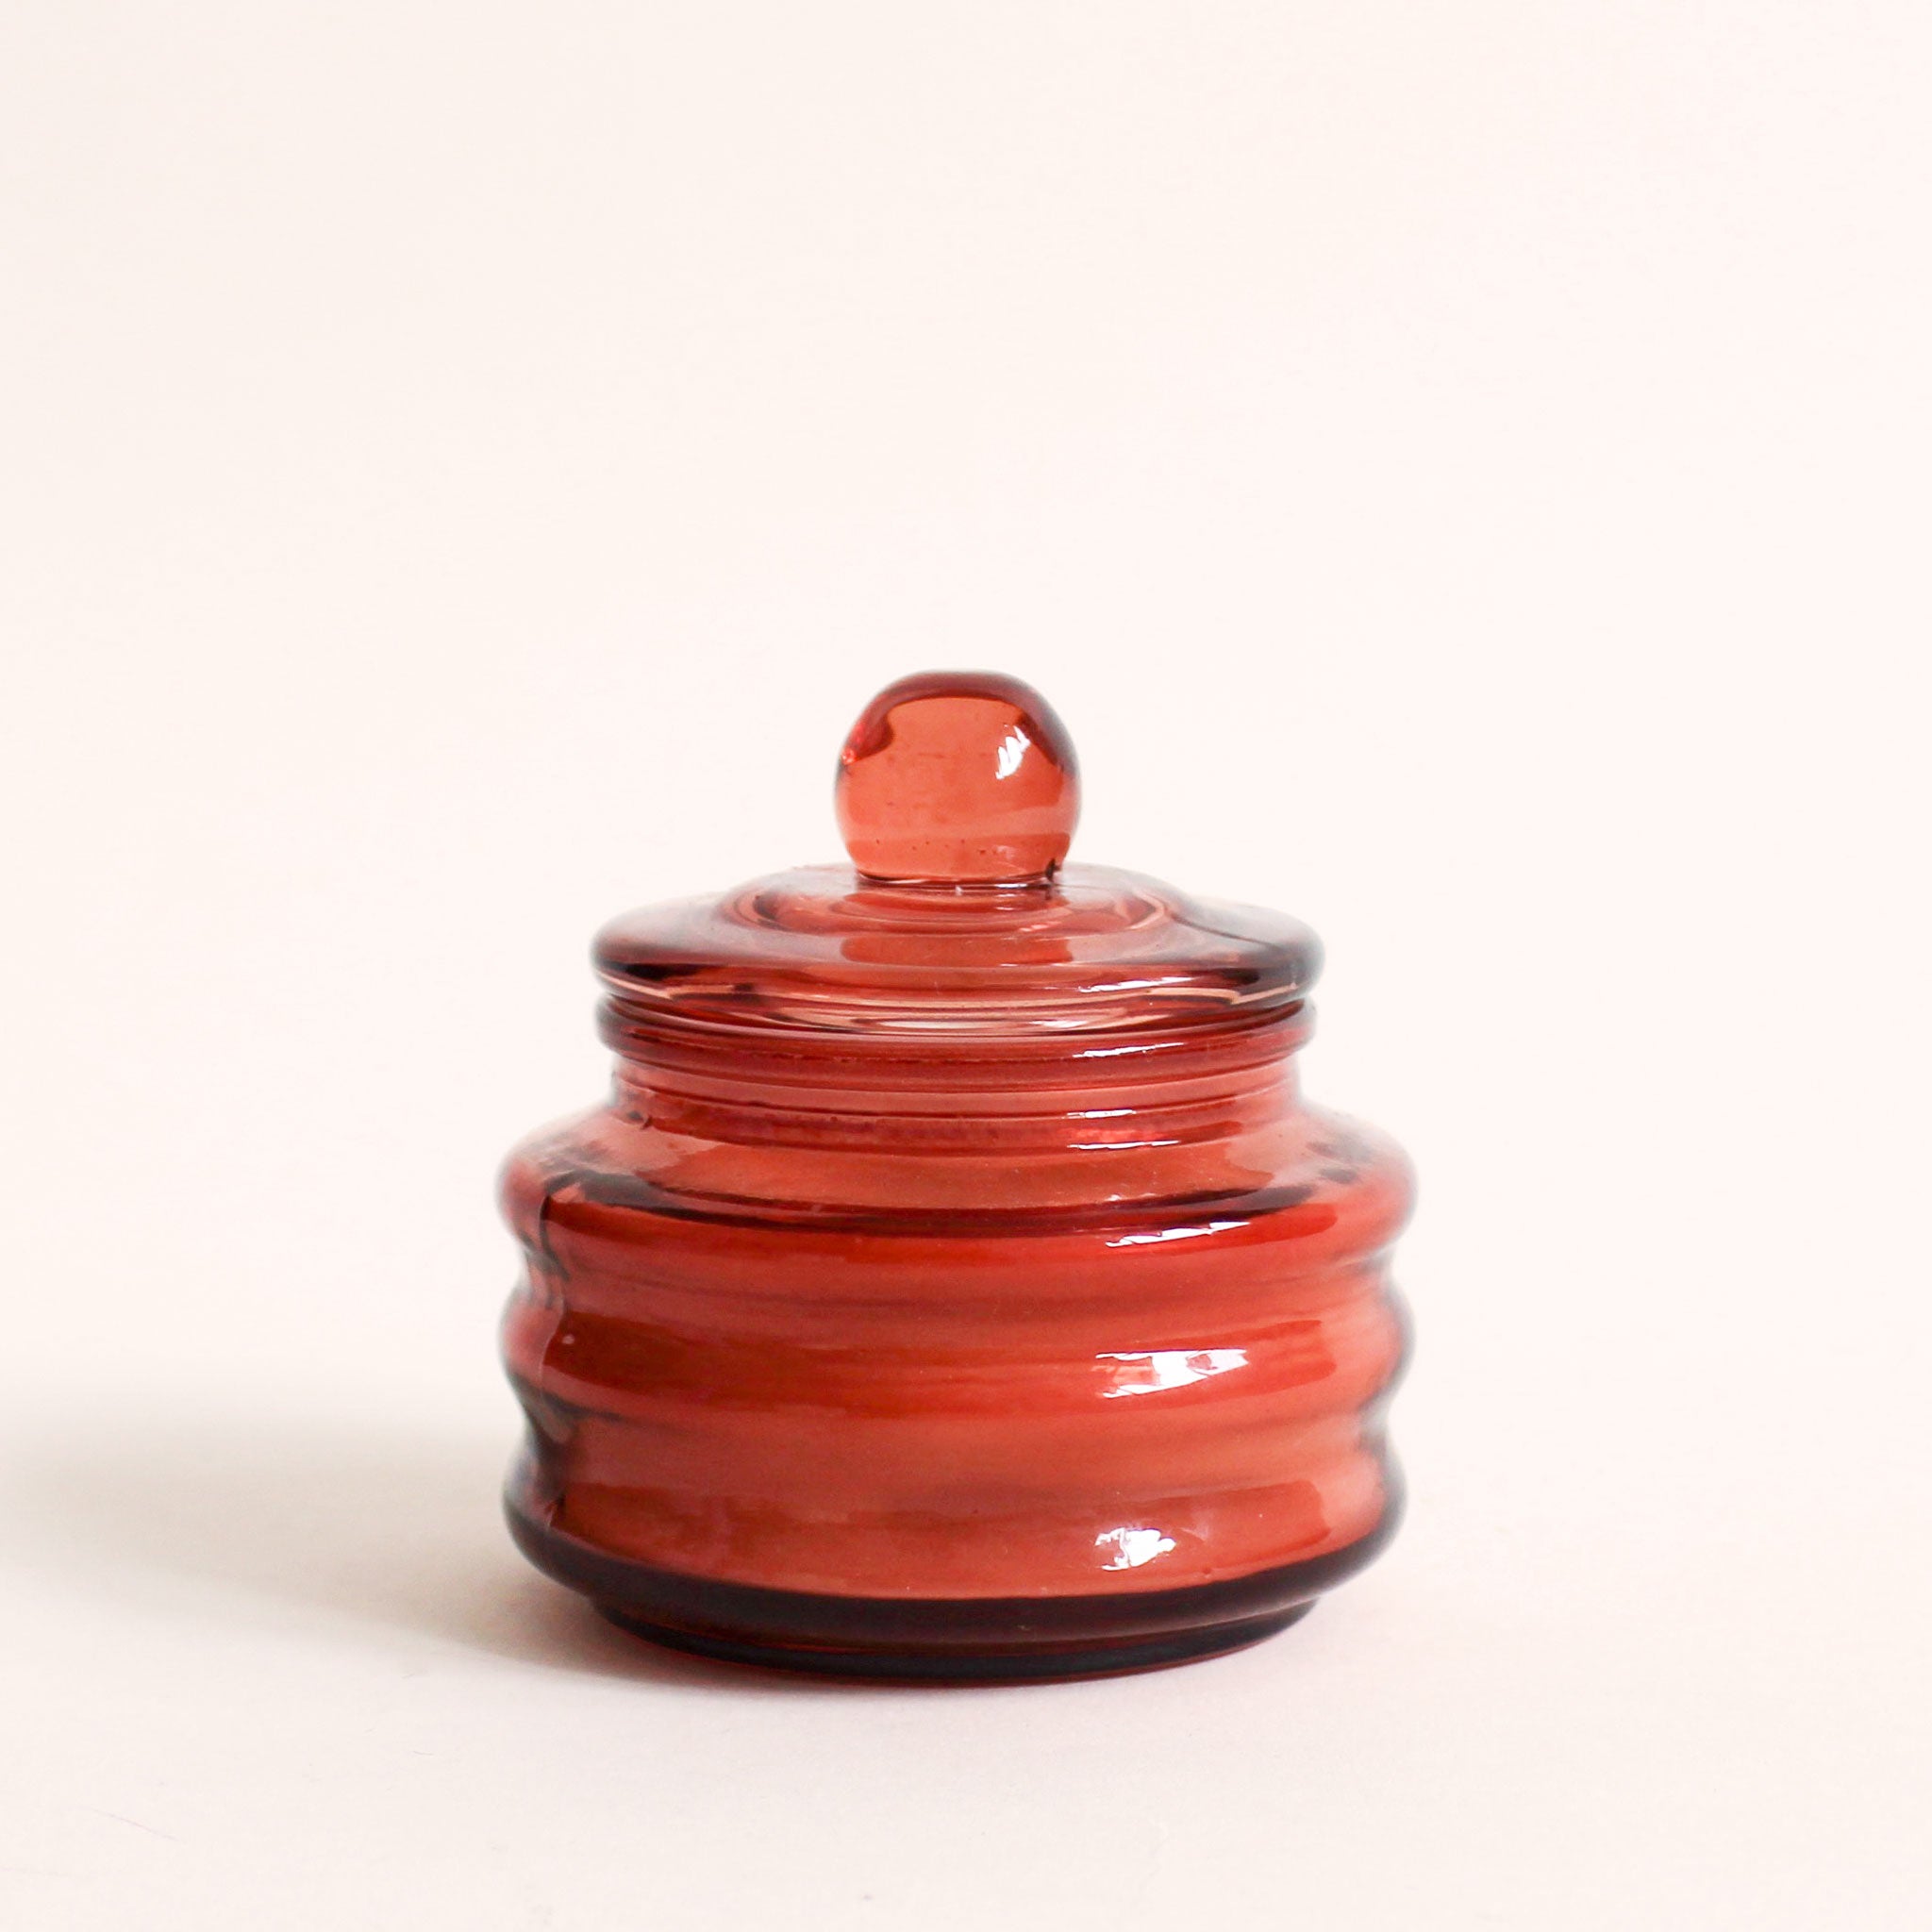 Red colored translucent beam candle vessel with white wax candle, and matching glass lid.